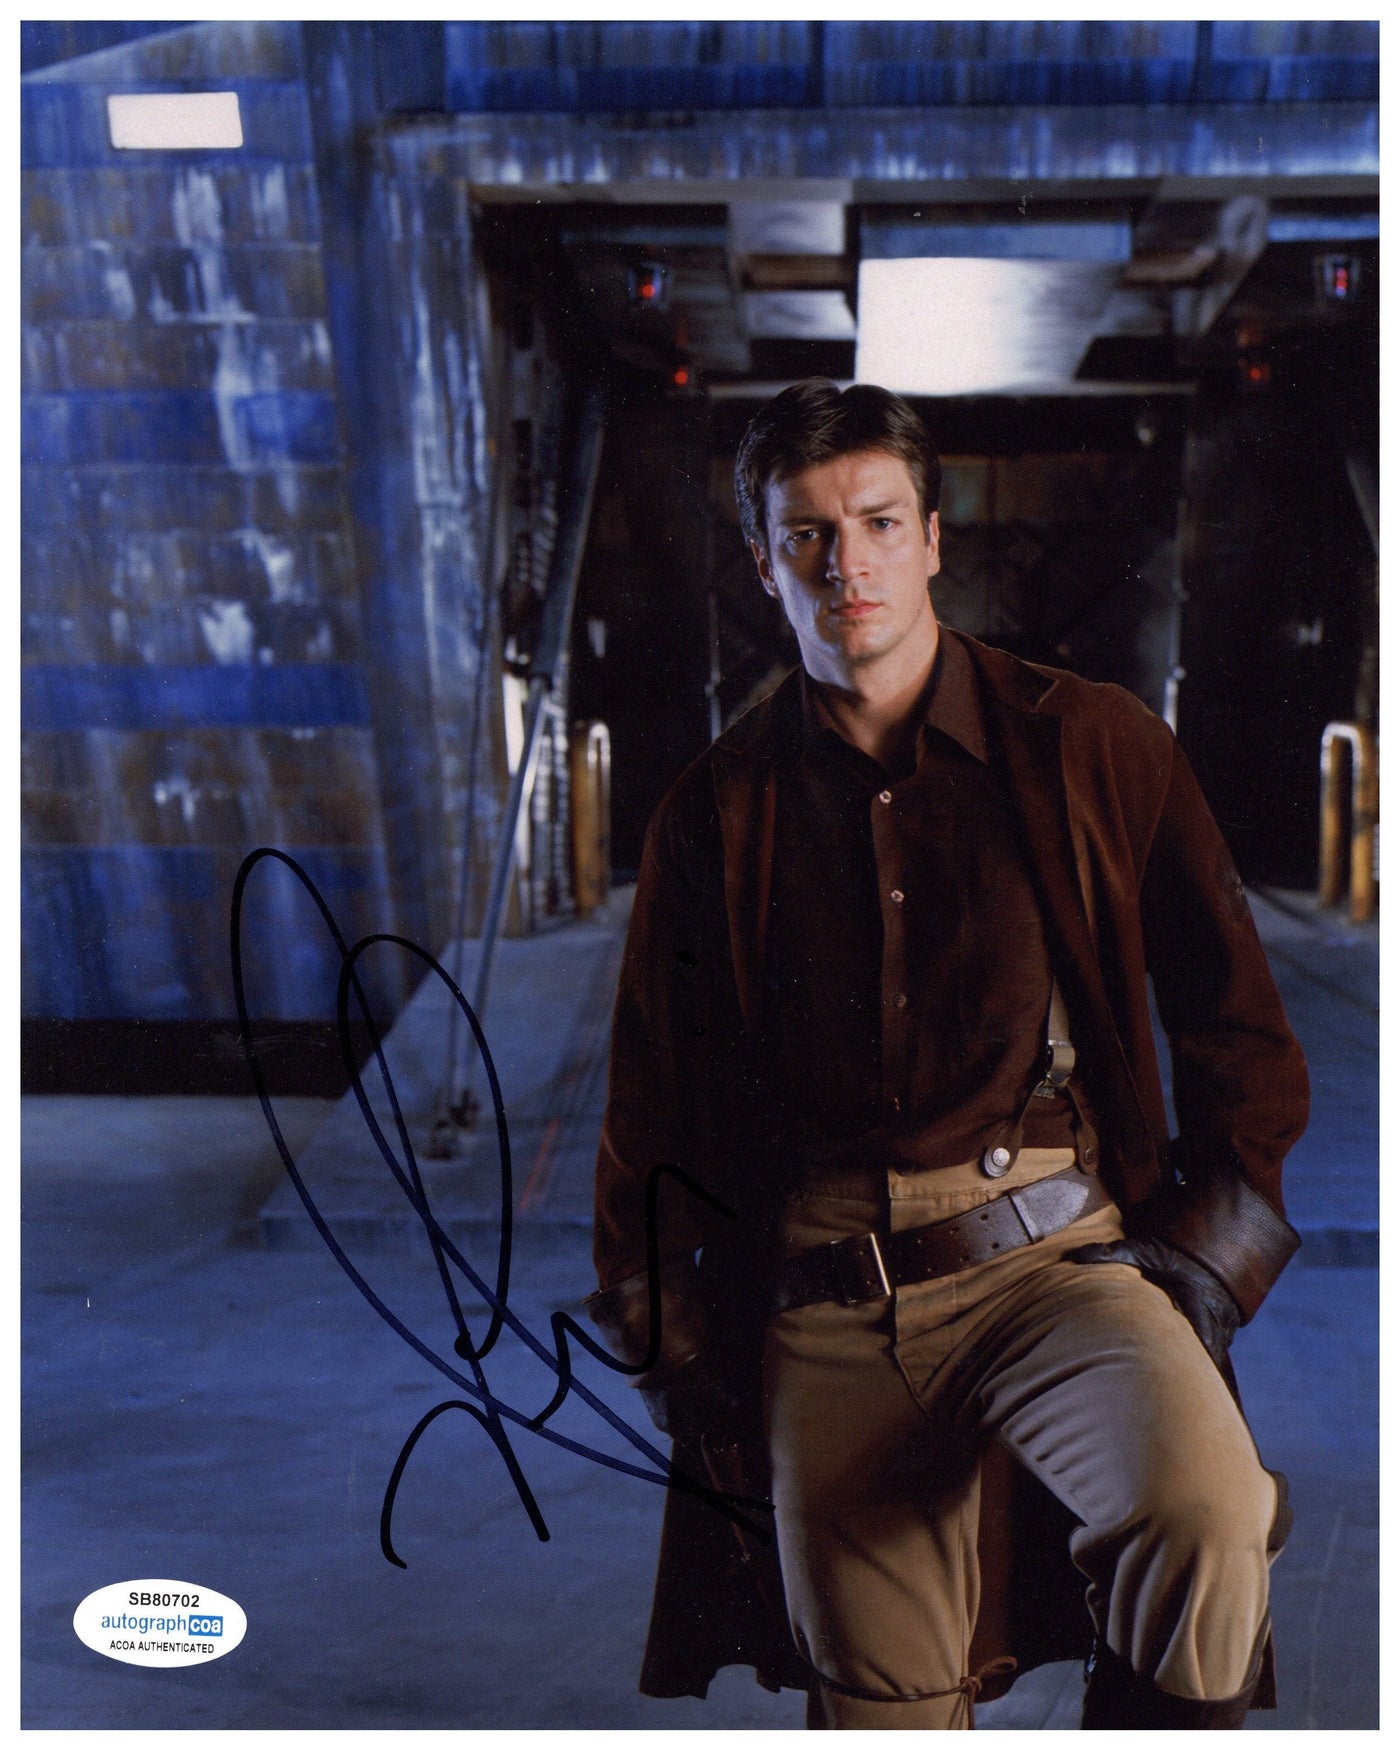 Nathan Fillion Signed 8x10 Photograph Firefly Capt Mal Reynolds Autographed ACOA